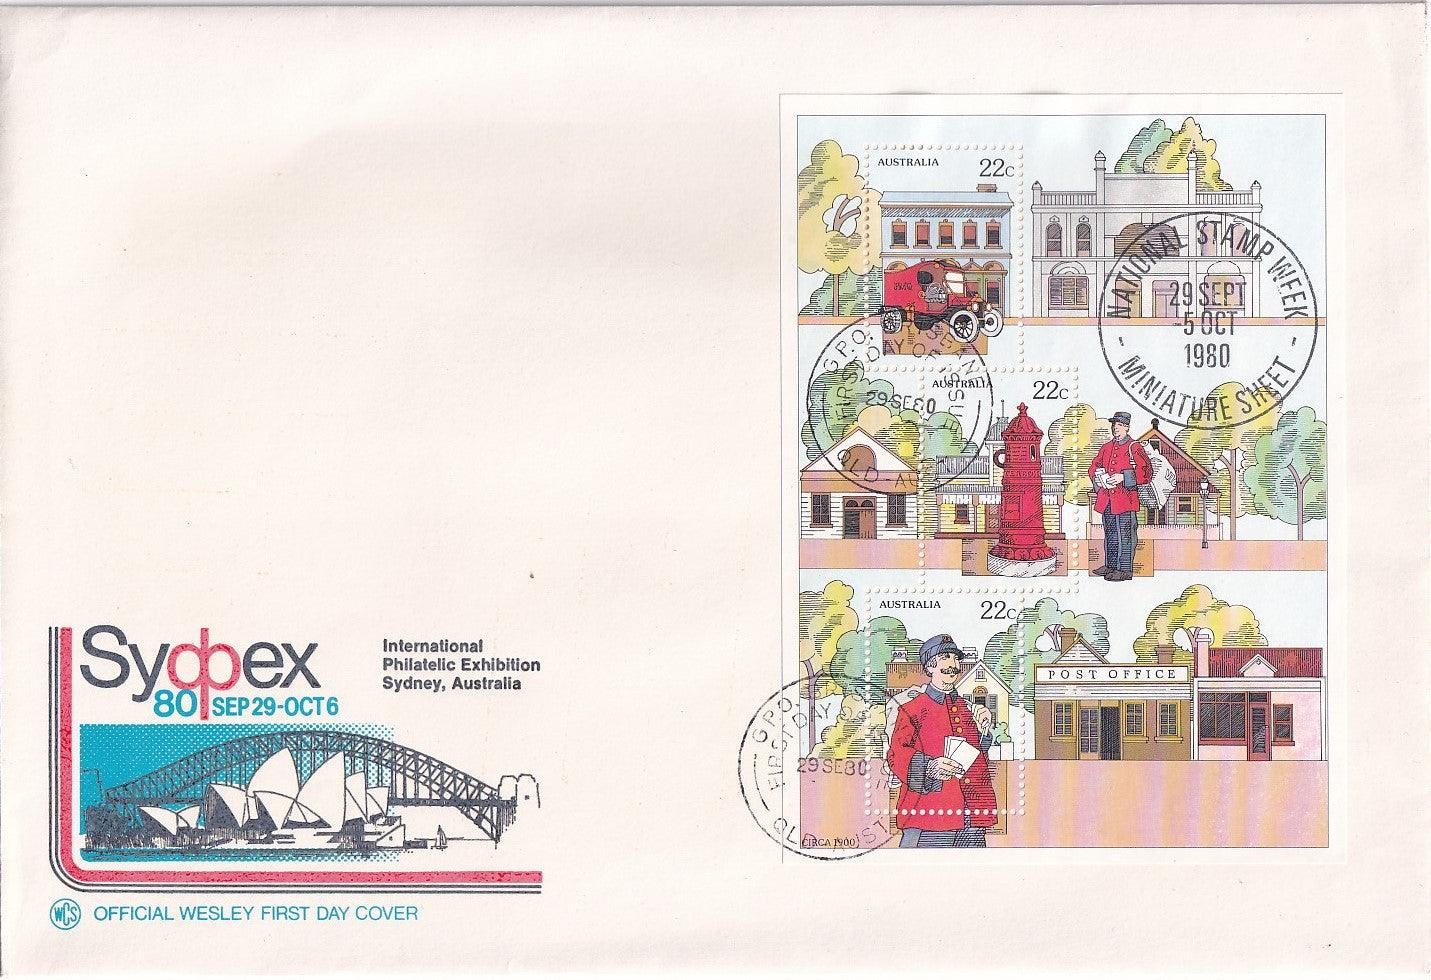 1980 Australian First Day Cover WCS - National Stamp Week "SYDPEX" National Philatelic Exhibition Miniature Sheet - Loose Change Coins